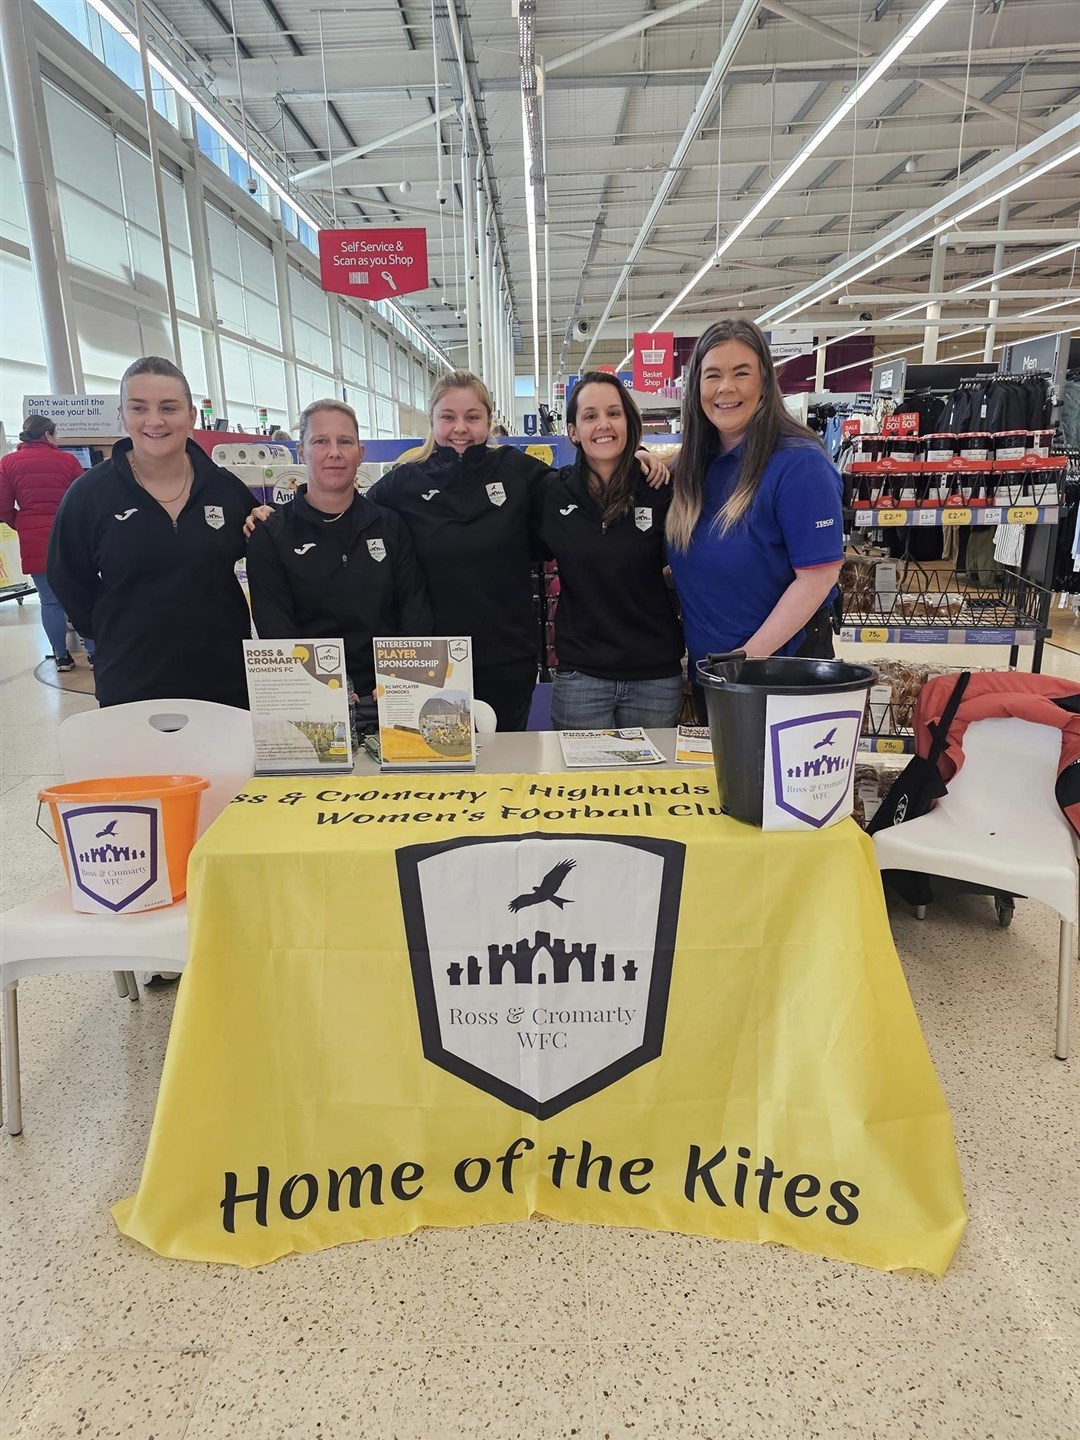 Dingwall Tesco is hosting the Ross and Cromarty women's team which aims to raise awareness and valuable funds. Picture courtesy of Tesco Dingwall.